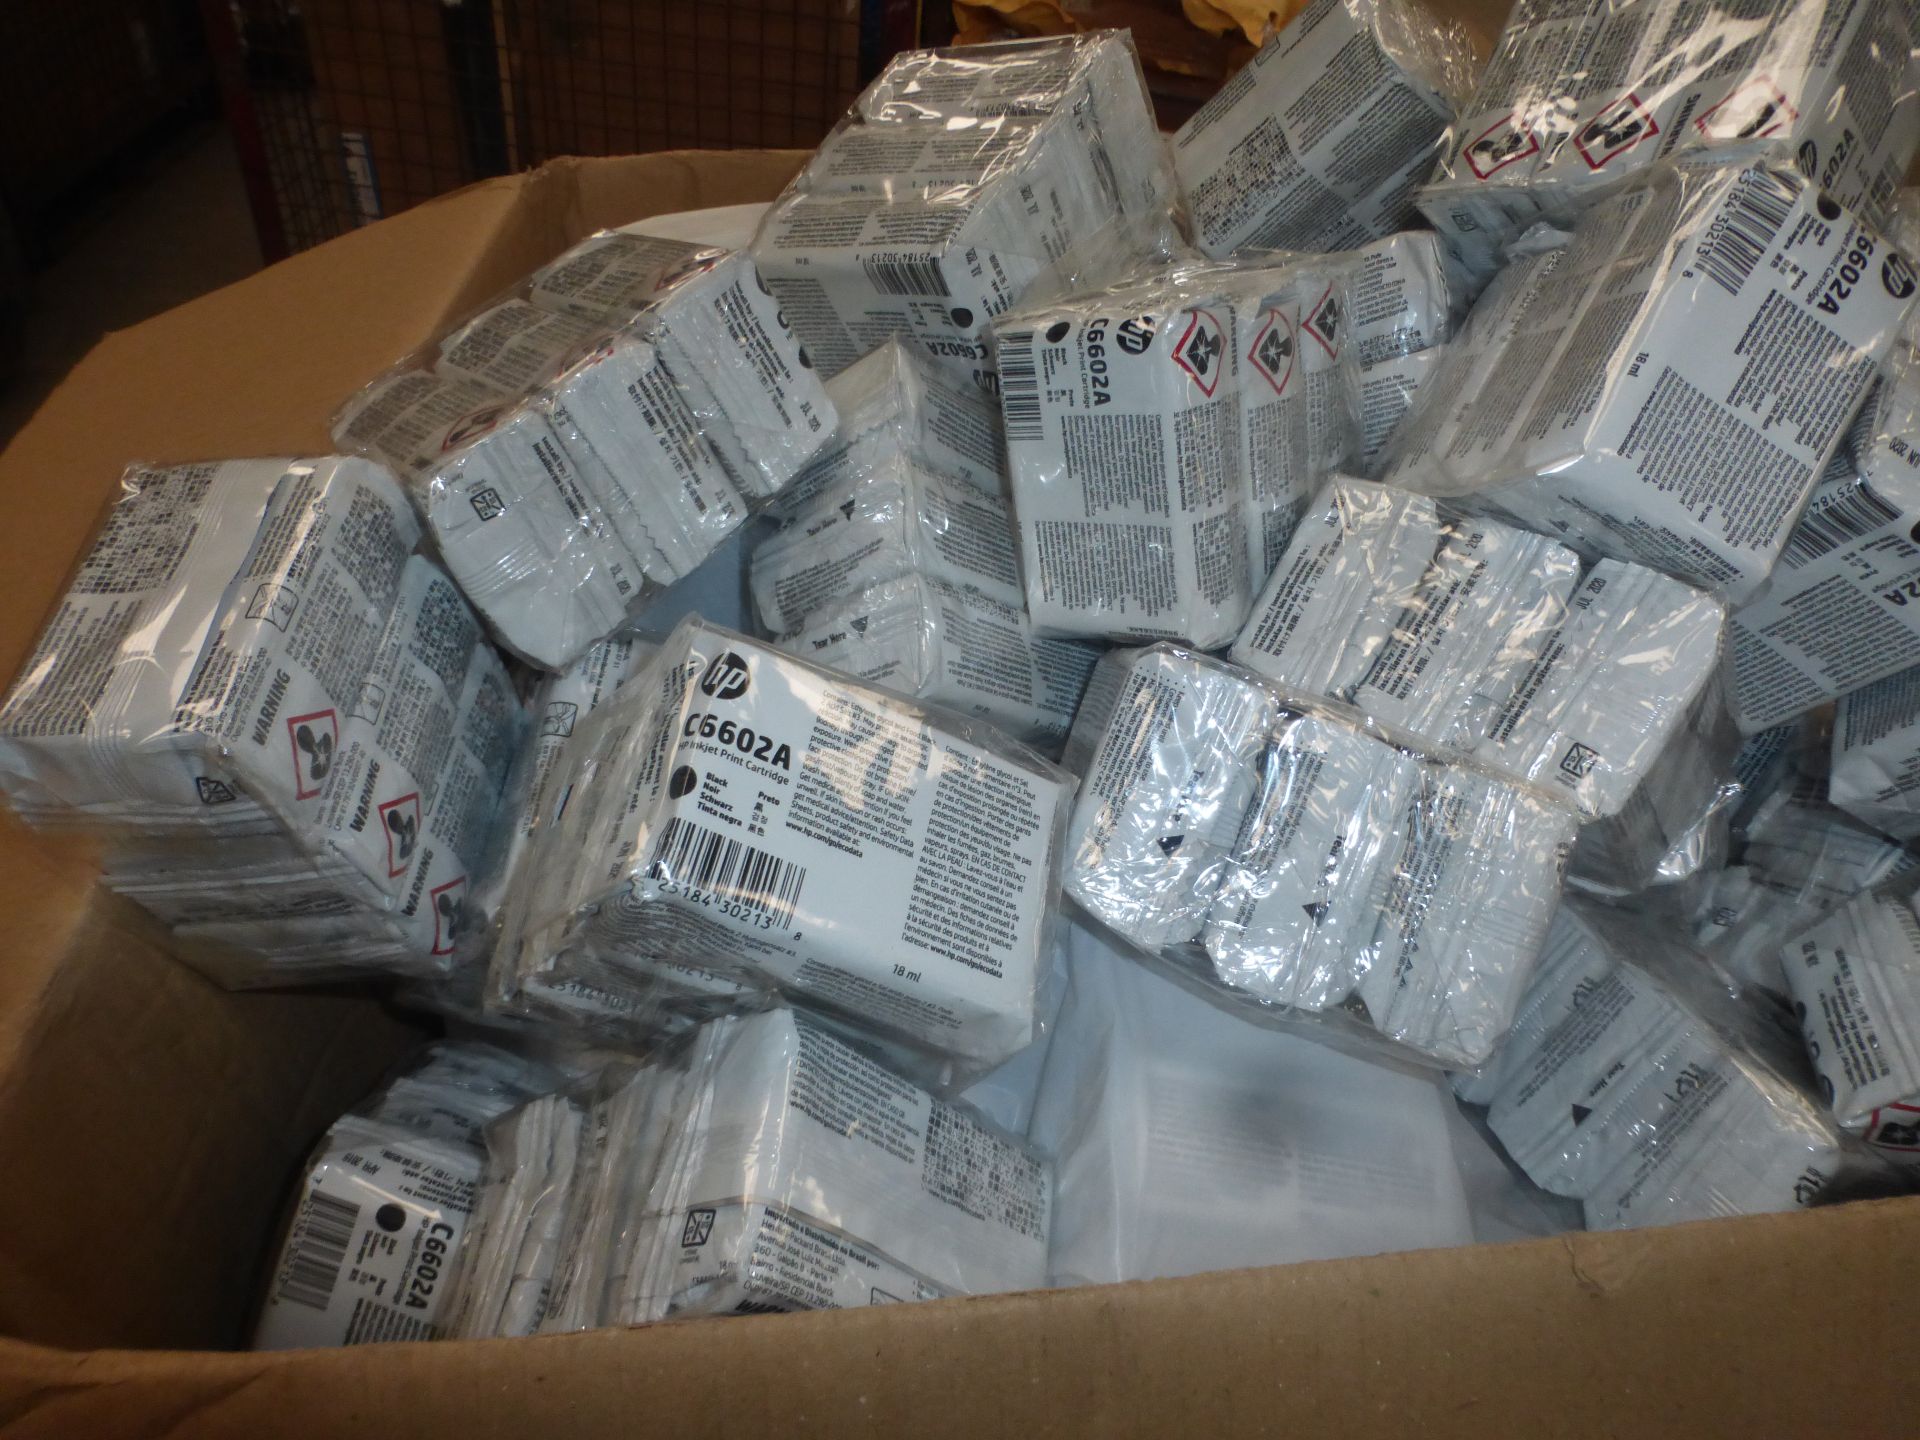 Approximately 120 individual HPC6602A black HP inkjet cartridges, install by Date: June 2020/